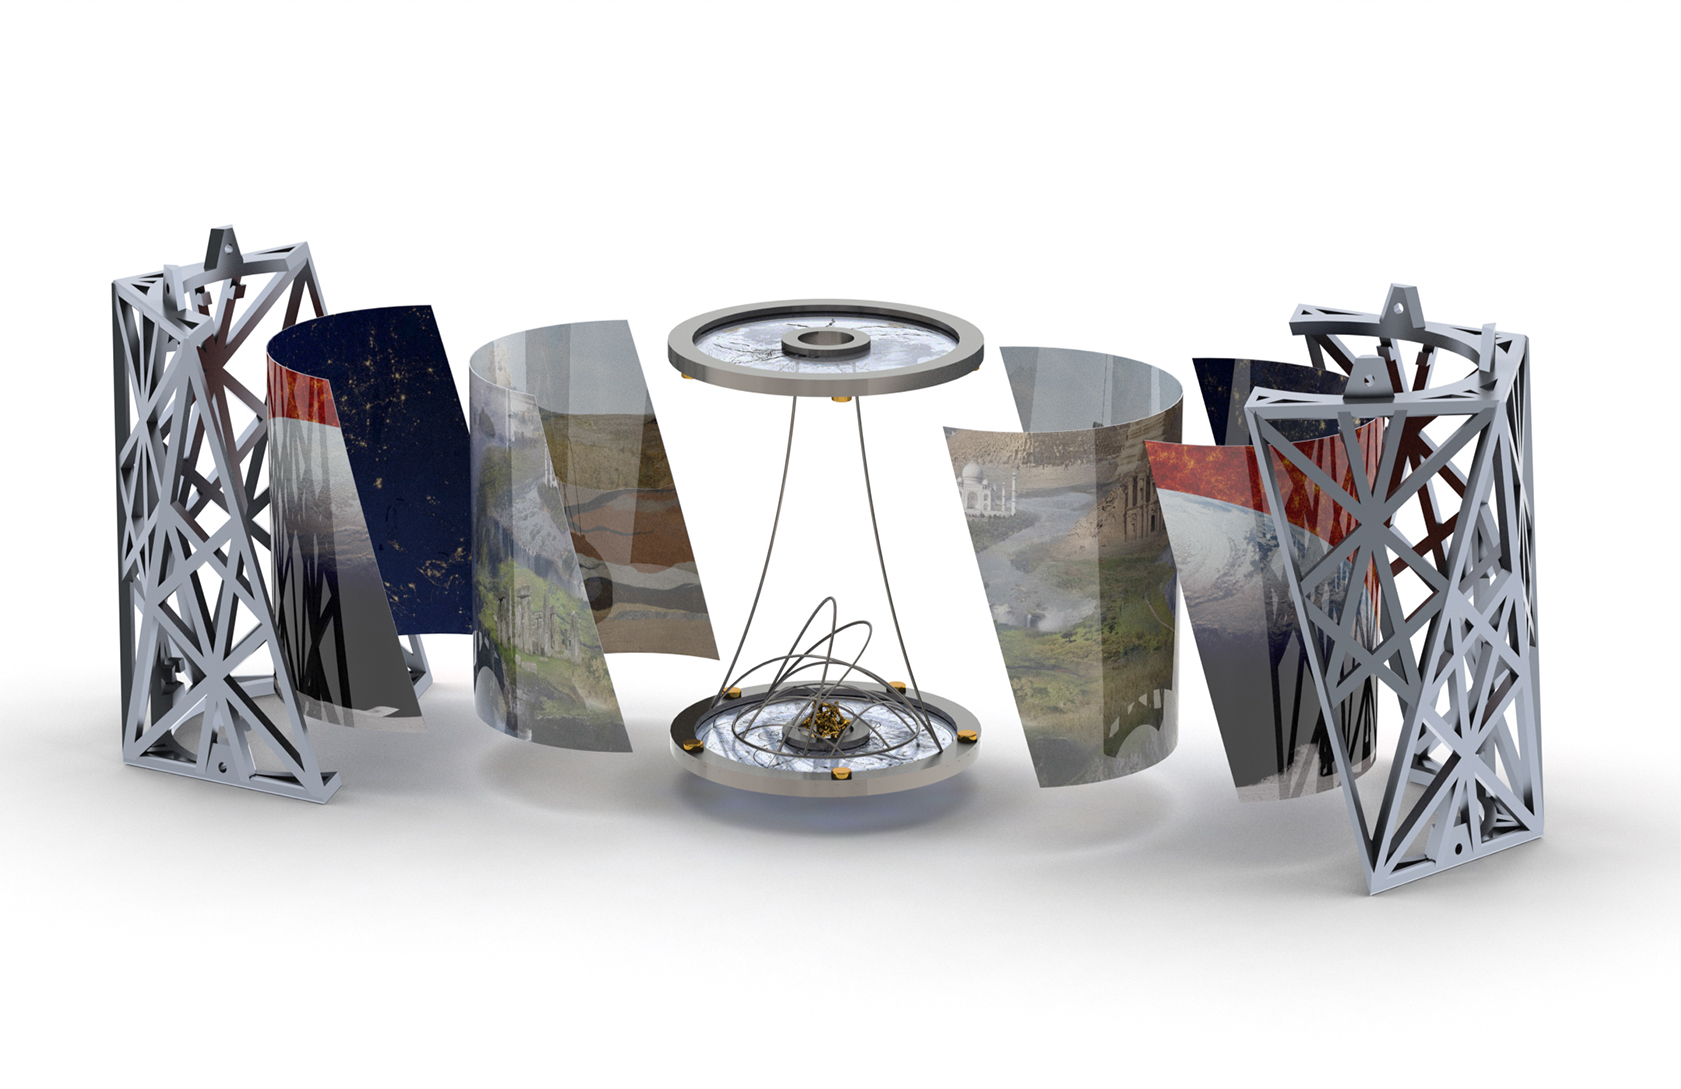 An exploded view of the Earth Chamber, one of four chambers that make up the MoonArk. MECCO will laser mark components of the MoonArk as part of a collaboration with The Moon Arts Group. Image rendered by Zach Schwemler; provided by The Moon Arts Group